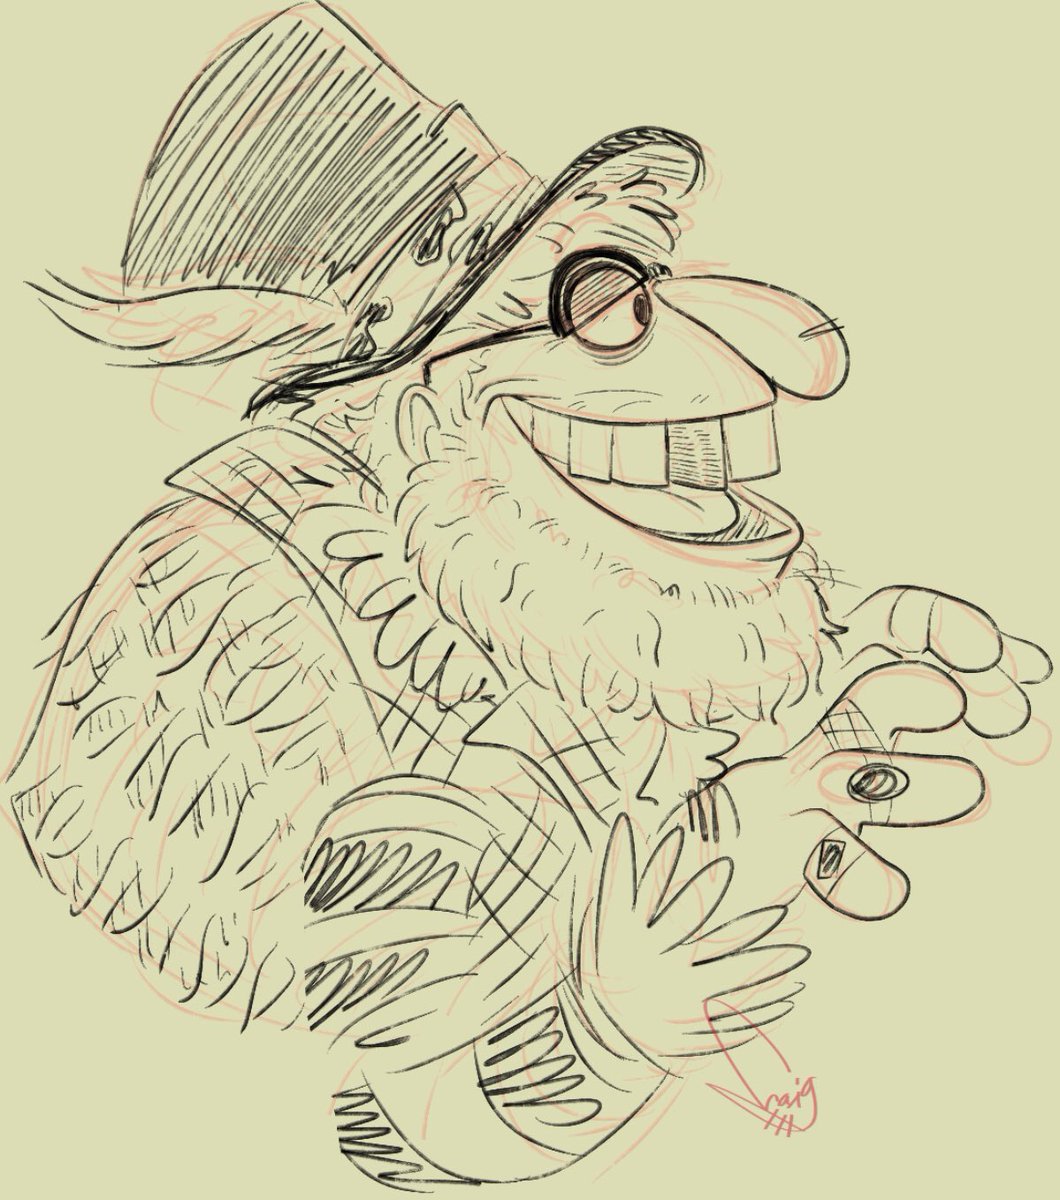 oh yes i finally drew dr teeth after a long while of waiting #MuppetsMayhem